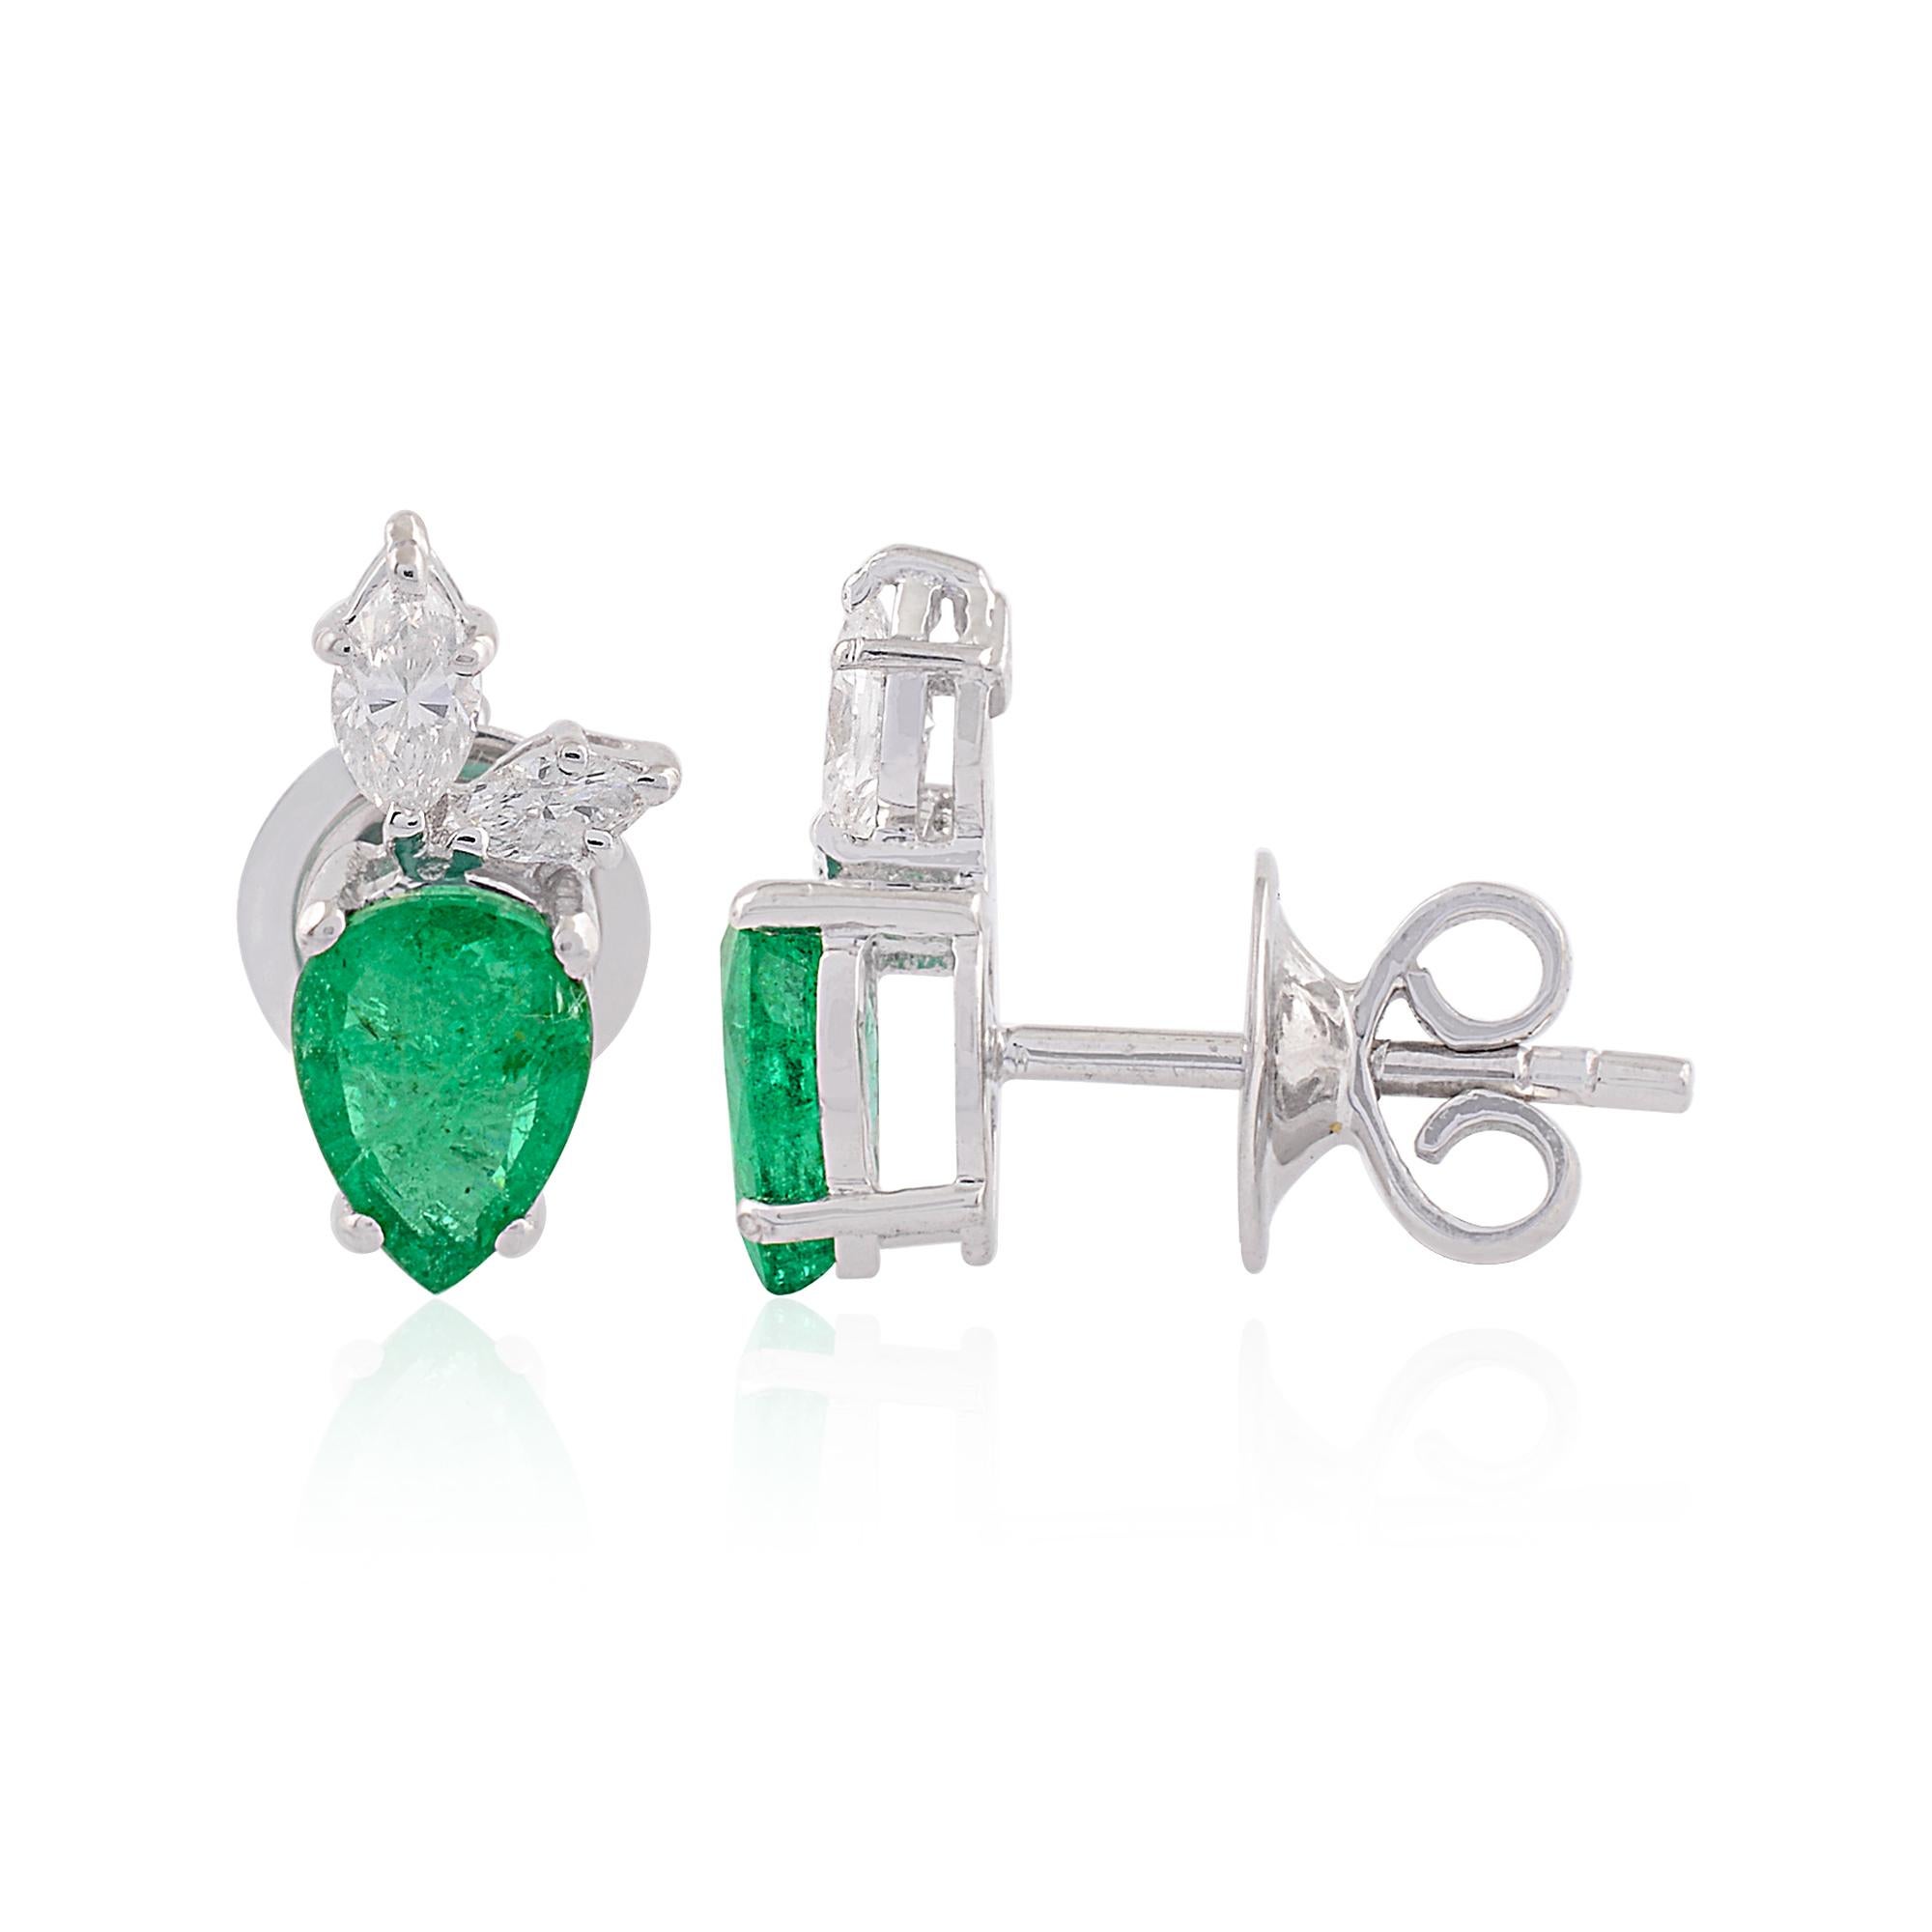 Item Code :- SEE-1328H
Gross Wt. :- 2.94 gm
18k Solid White Gold Wt. :- 2.65 gm
Natural Diamond Wt. :- 0.28 Ct  ( AVERAGE DIAMOND CLARITY SI1-SI2 & COLOR H-I )
Zambian Emerald Wt. :- 1.15 Ct
Earrings Size :- 11 x 5.5 mm approx.

✦